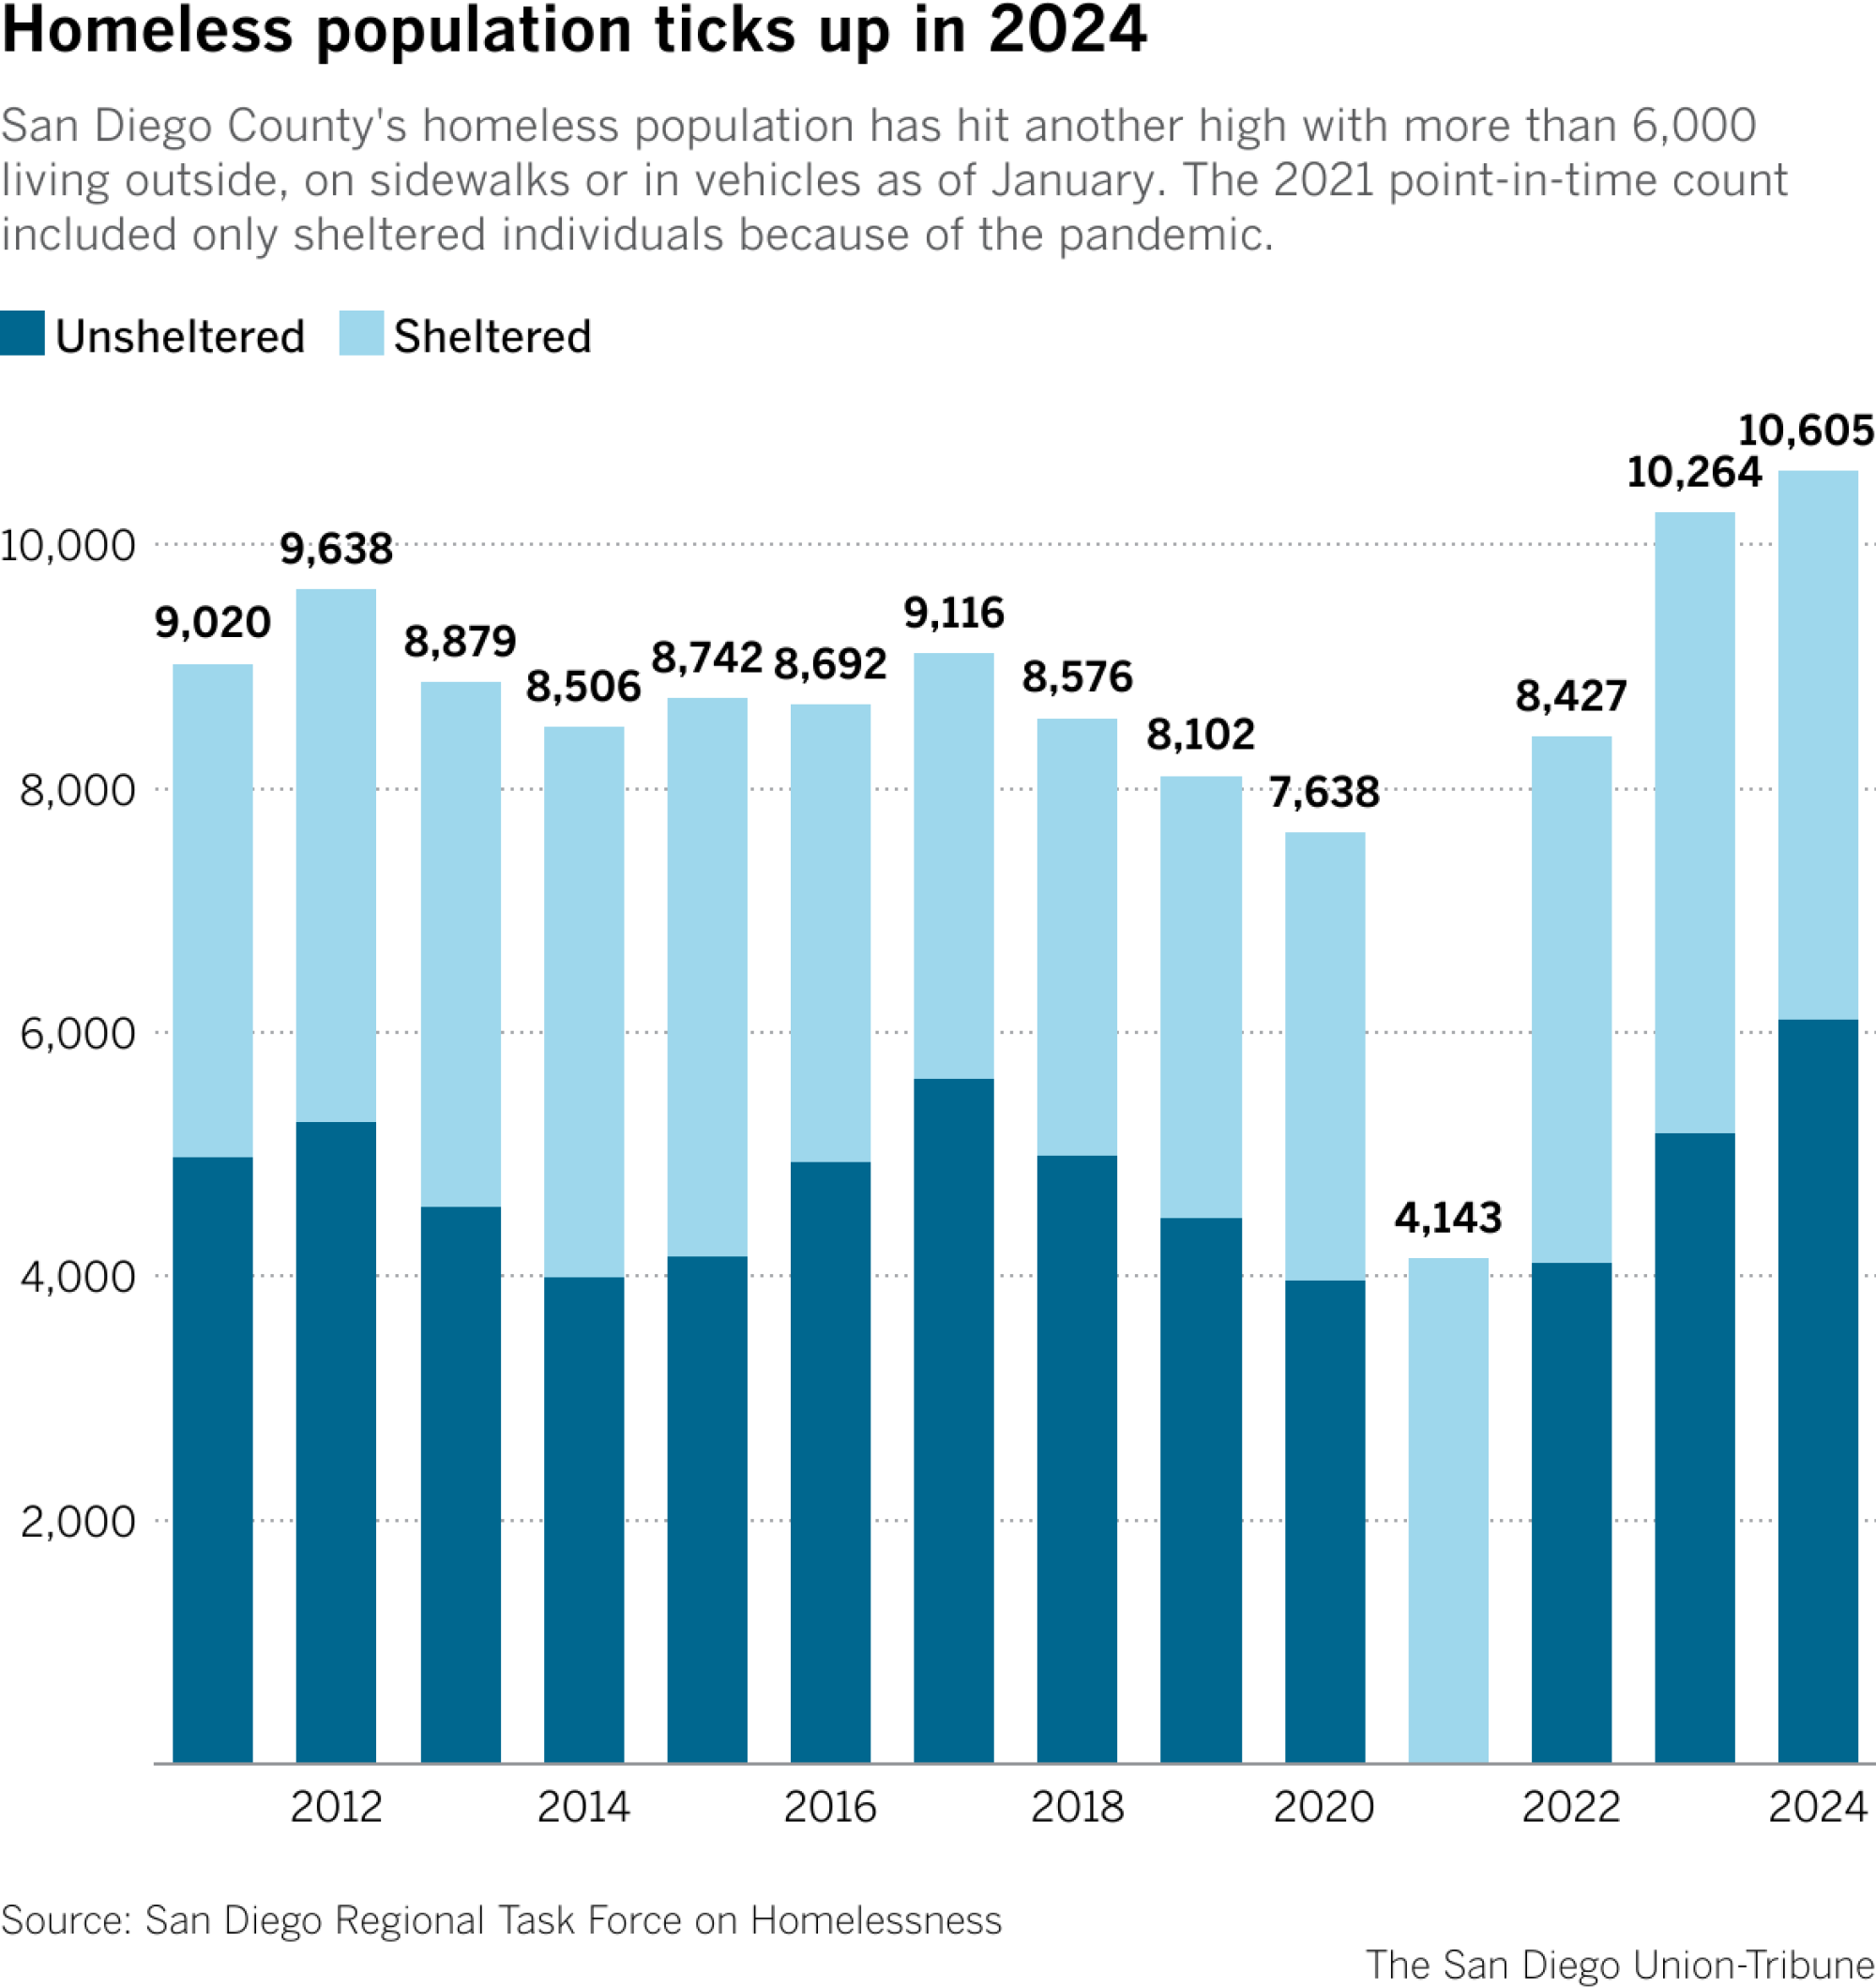 San Diego County's homeless population has hit another high with more than 6,000 living outside, on sidewalks or in vehicles as of January. The 2021 point-in-time count included only sheltered individuals because of the pandemic.